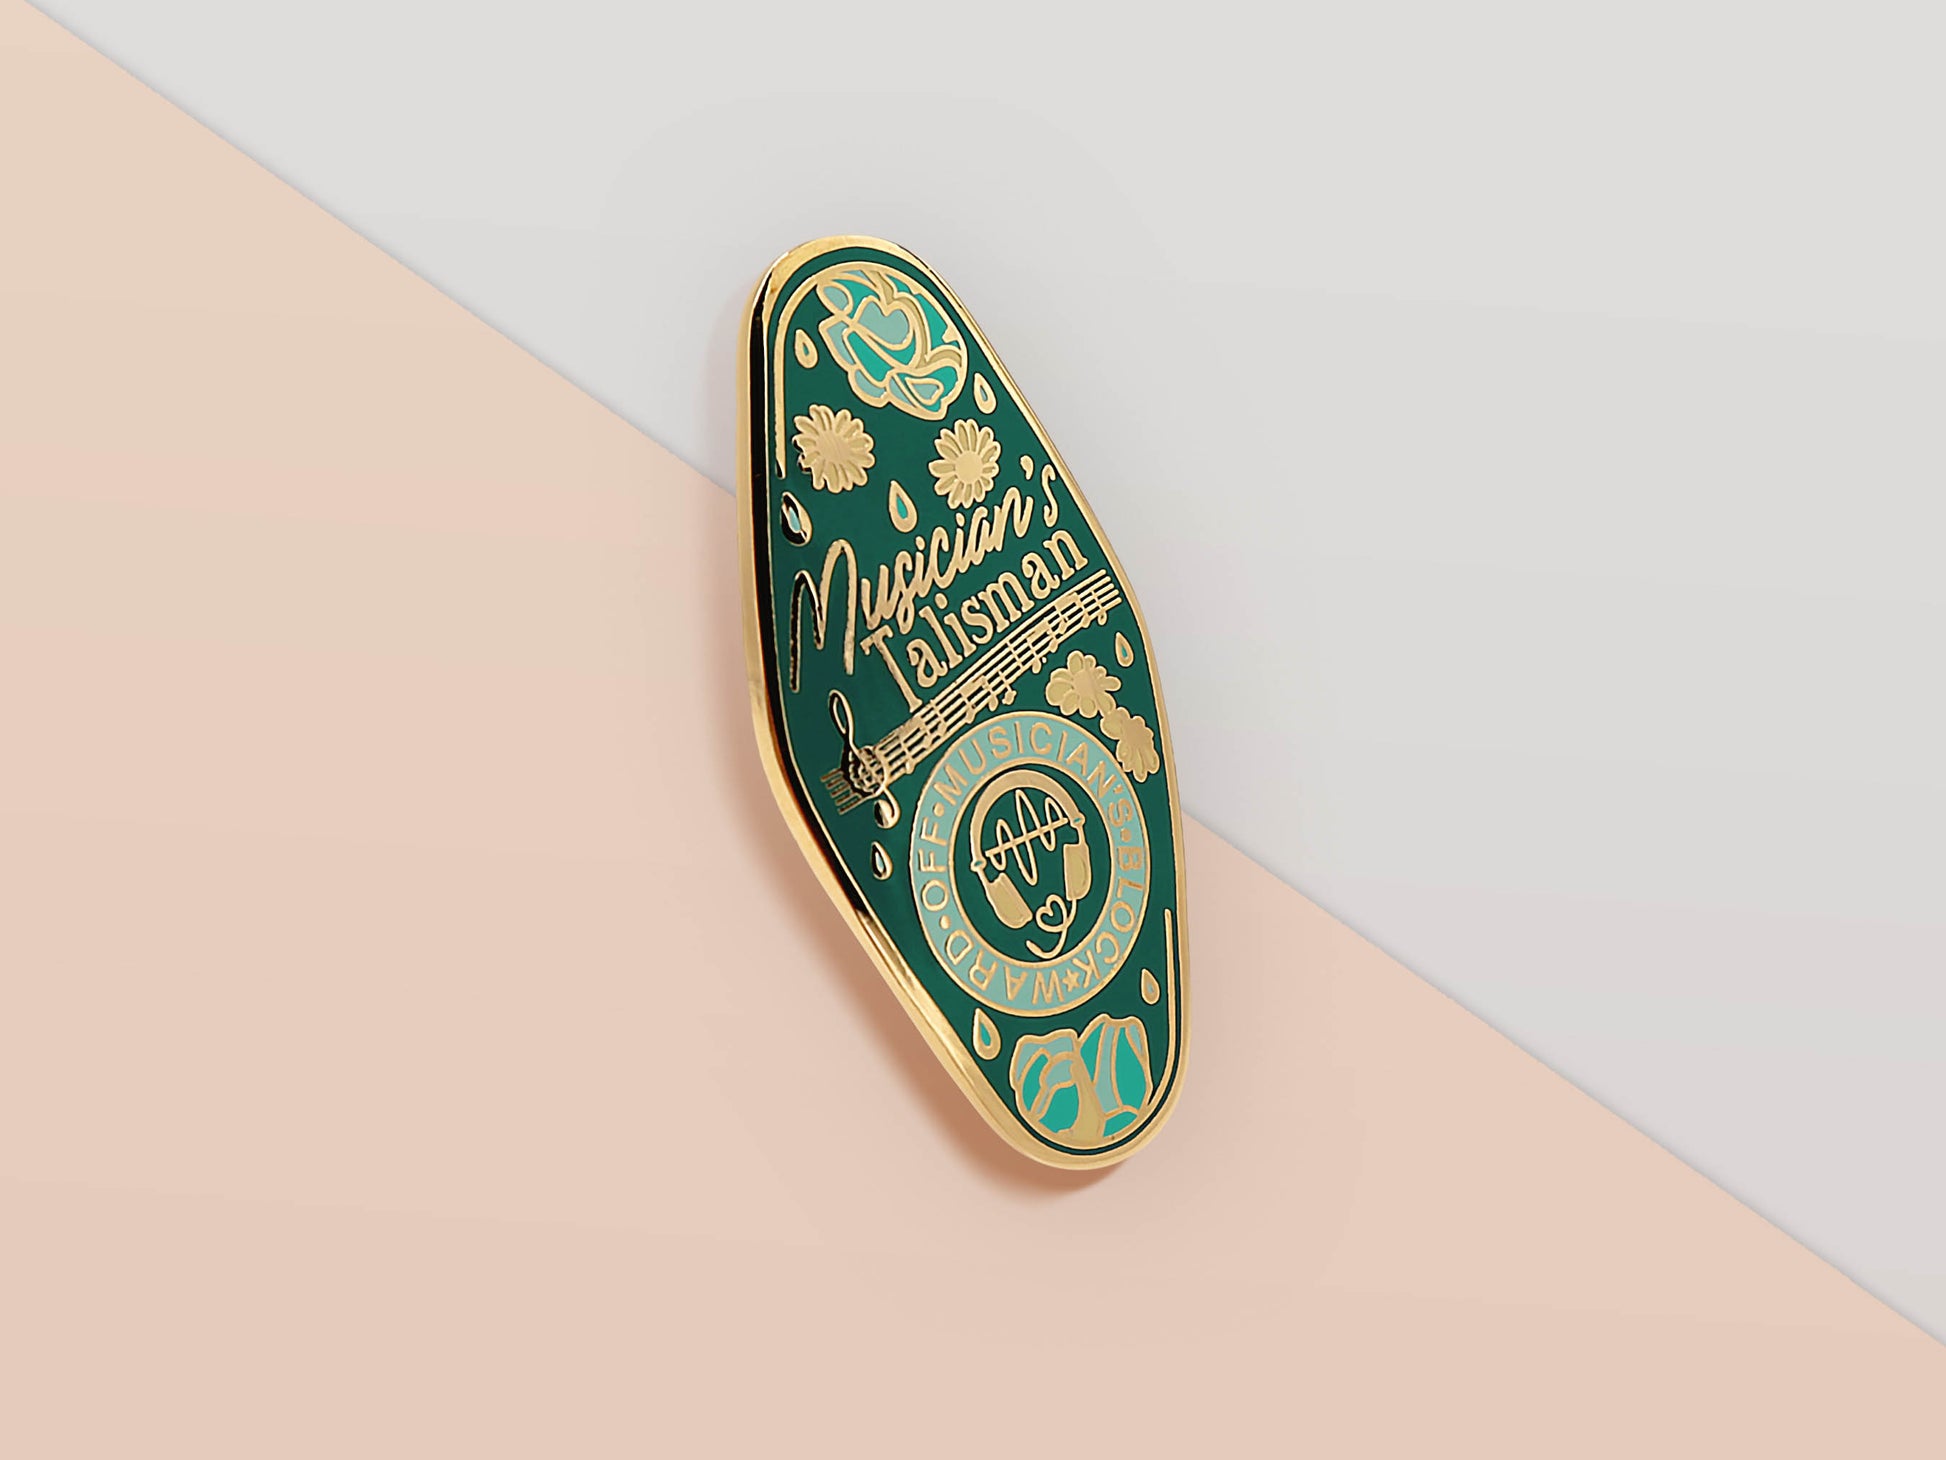 Gold Enamel Talisman Pin with blue design and the words Musician's Talisman, Ward of Musician's block. The pins design includes headphones and sheet music, raindrops, as well as flowers and crystals.